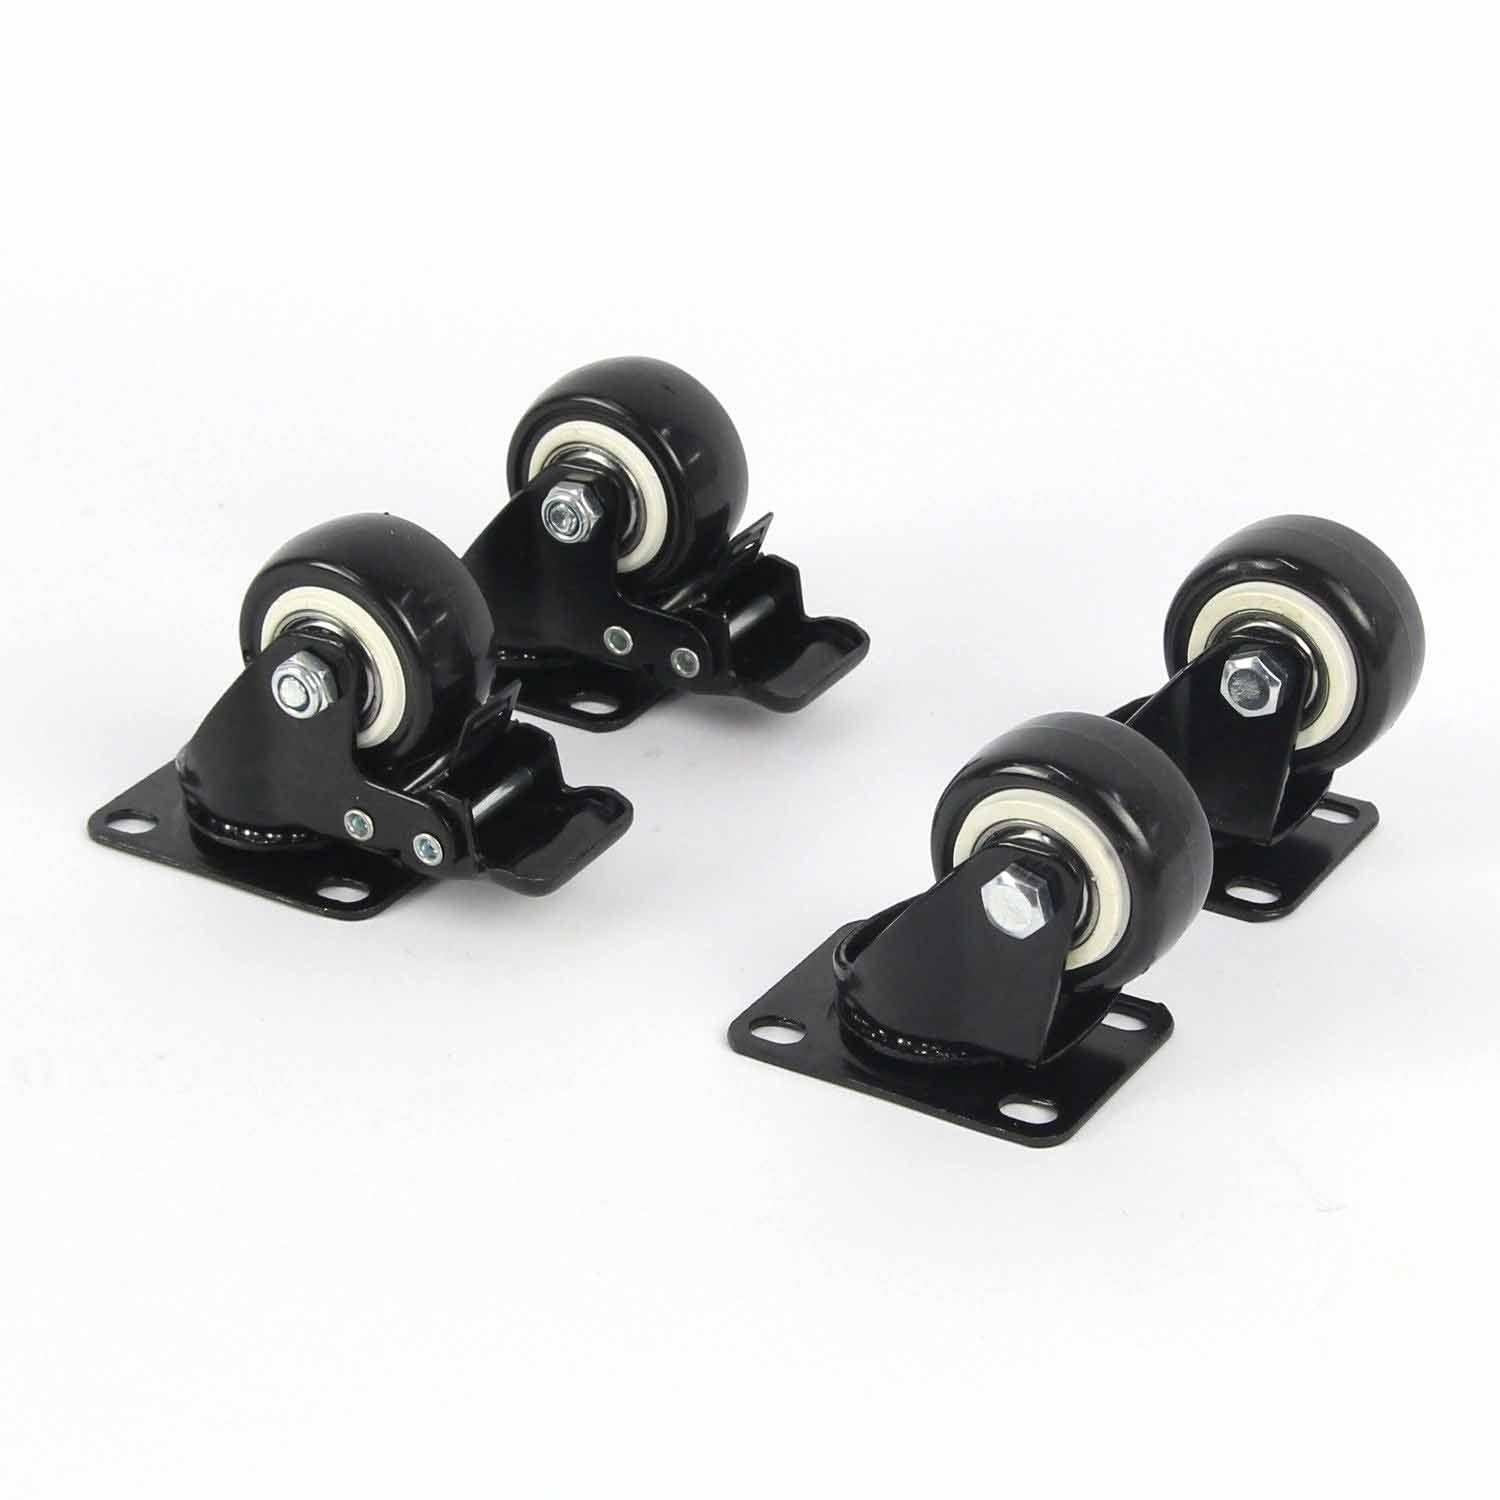 Series 4 / Series X - Replacement 1.5 inch Rubber Castor Wheels(4/set including 2 with brake) - KegLand